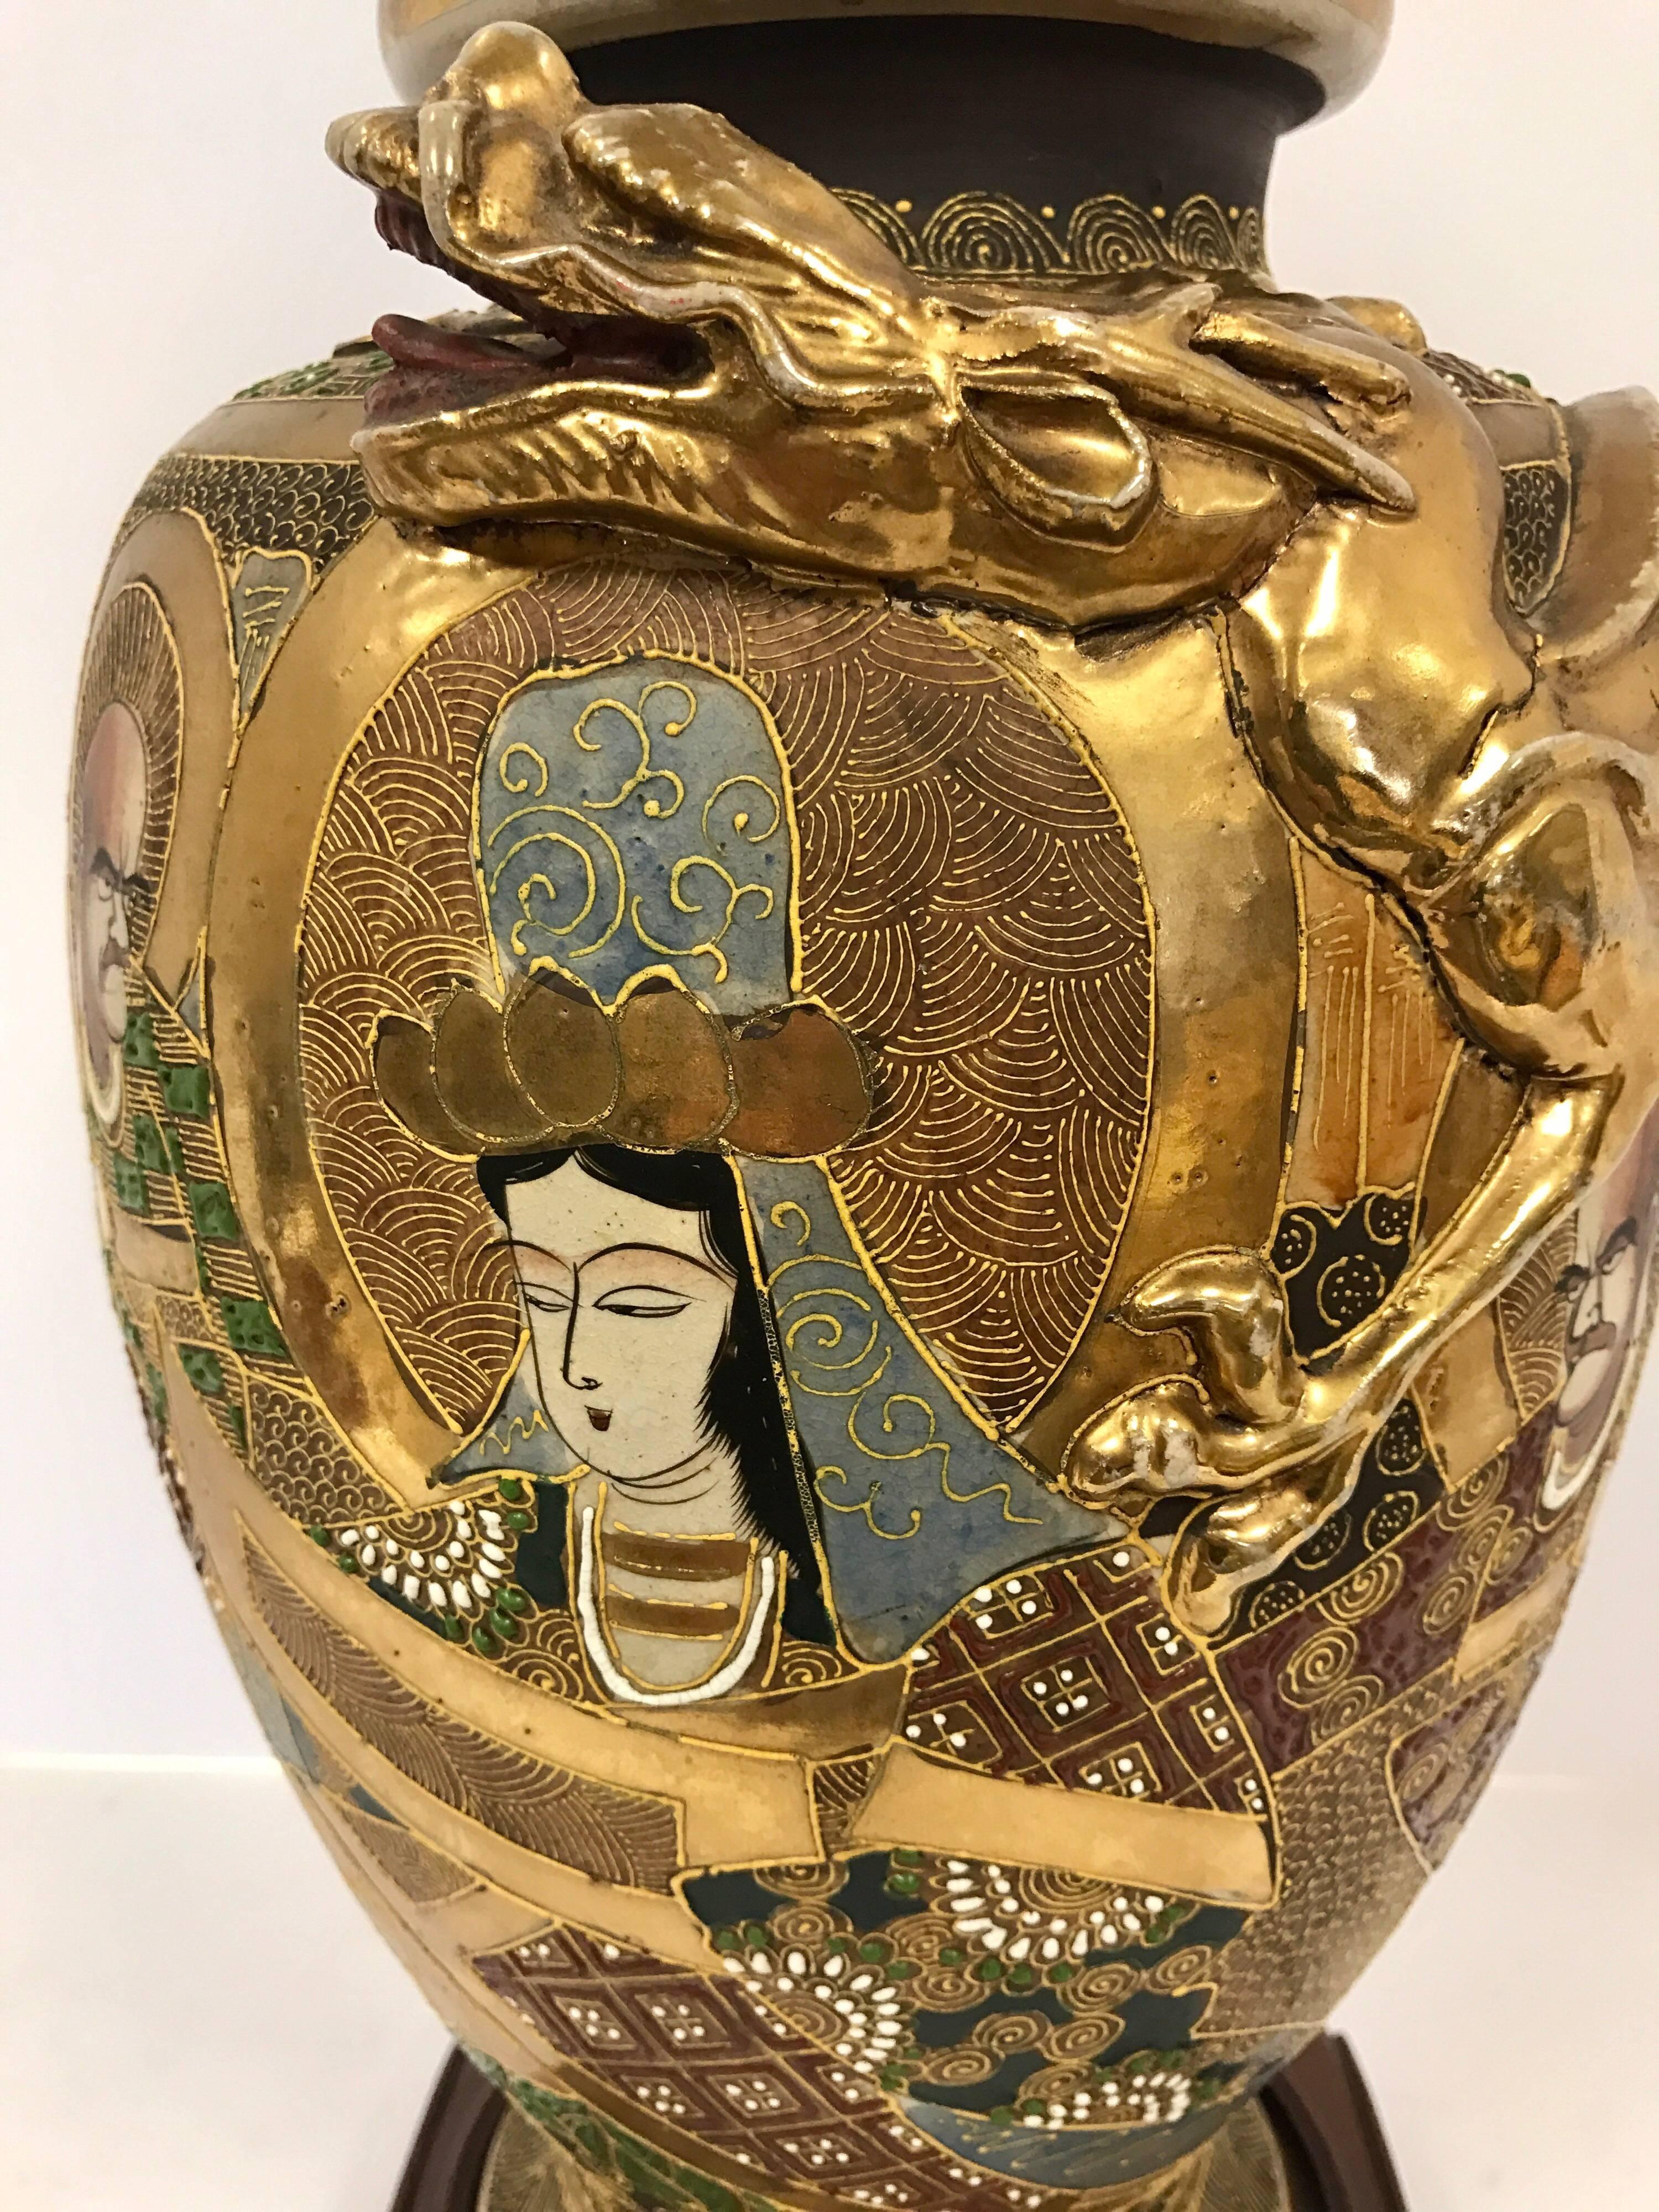 Elegant gold gilt Japanese Satsuma urn dragon lamp with raised figures. Base is elegant curved mahogany wood. Wired for USA and in working order.